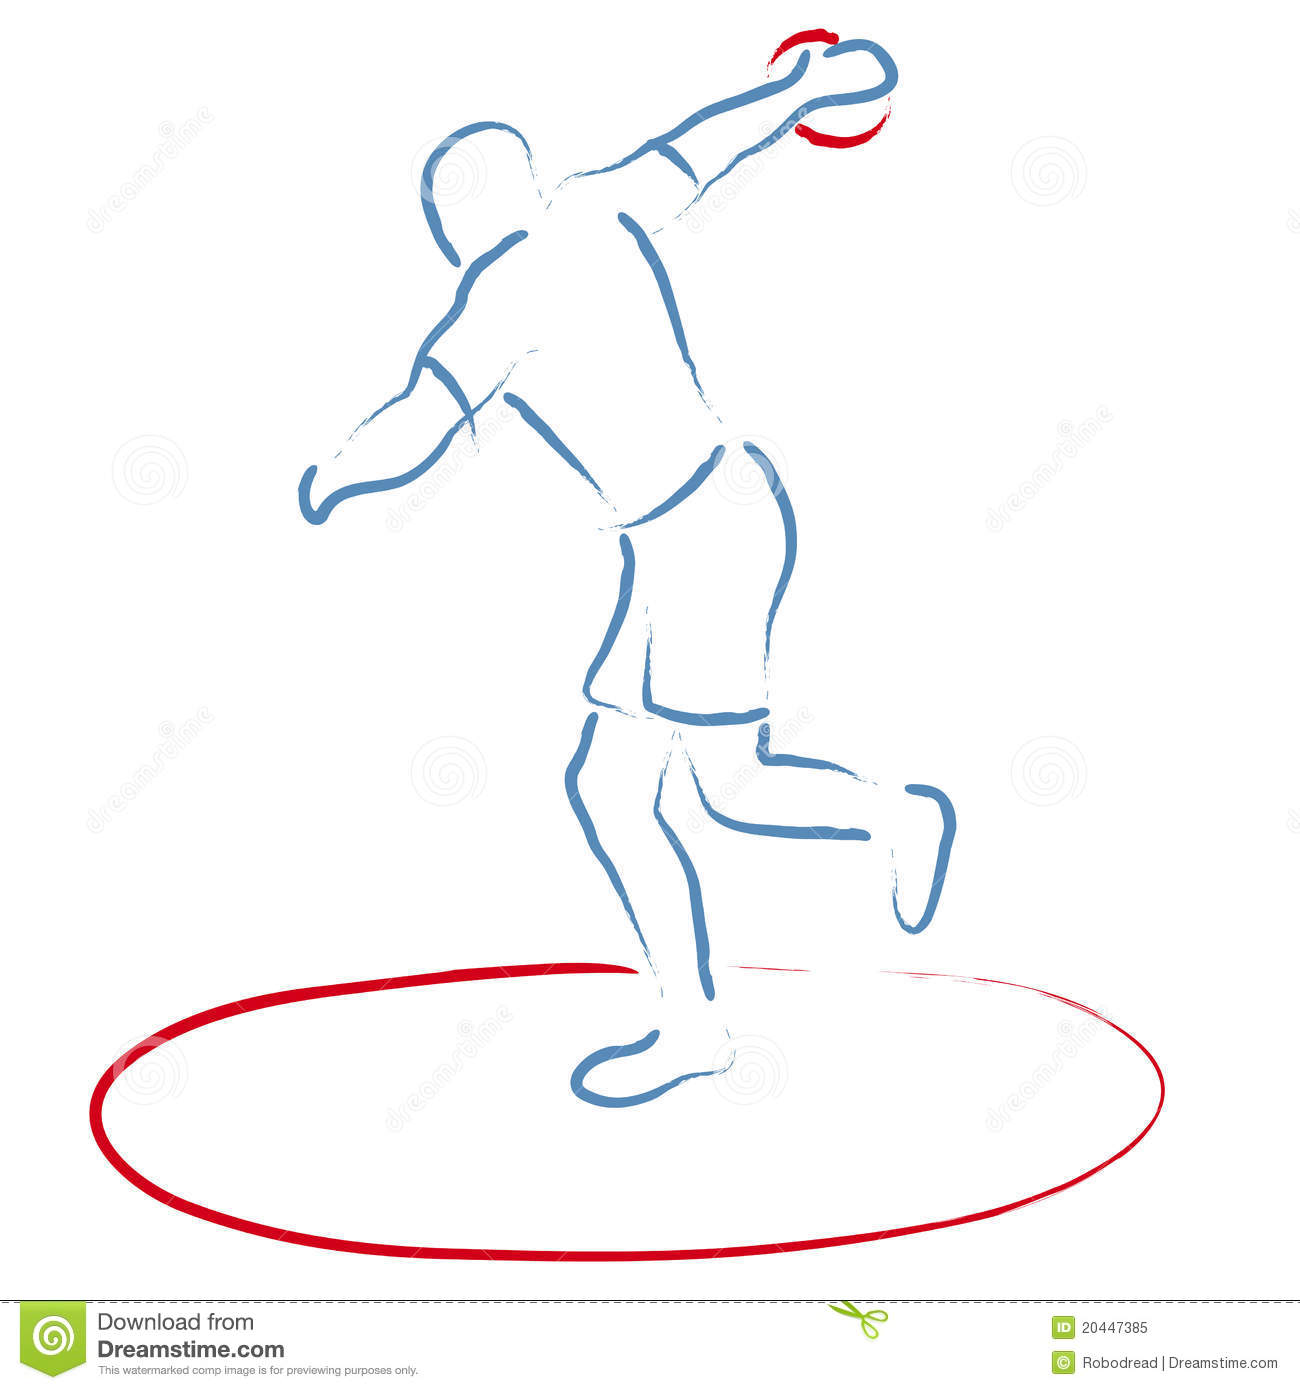 Stylized Illustration Of A Man Who Throws The Disc